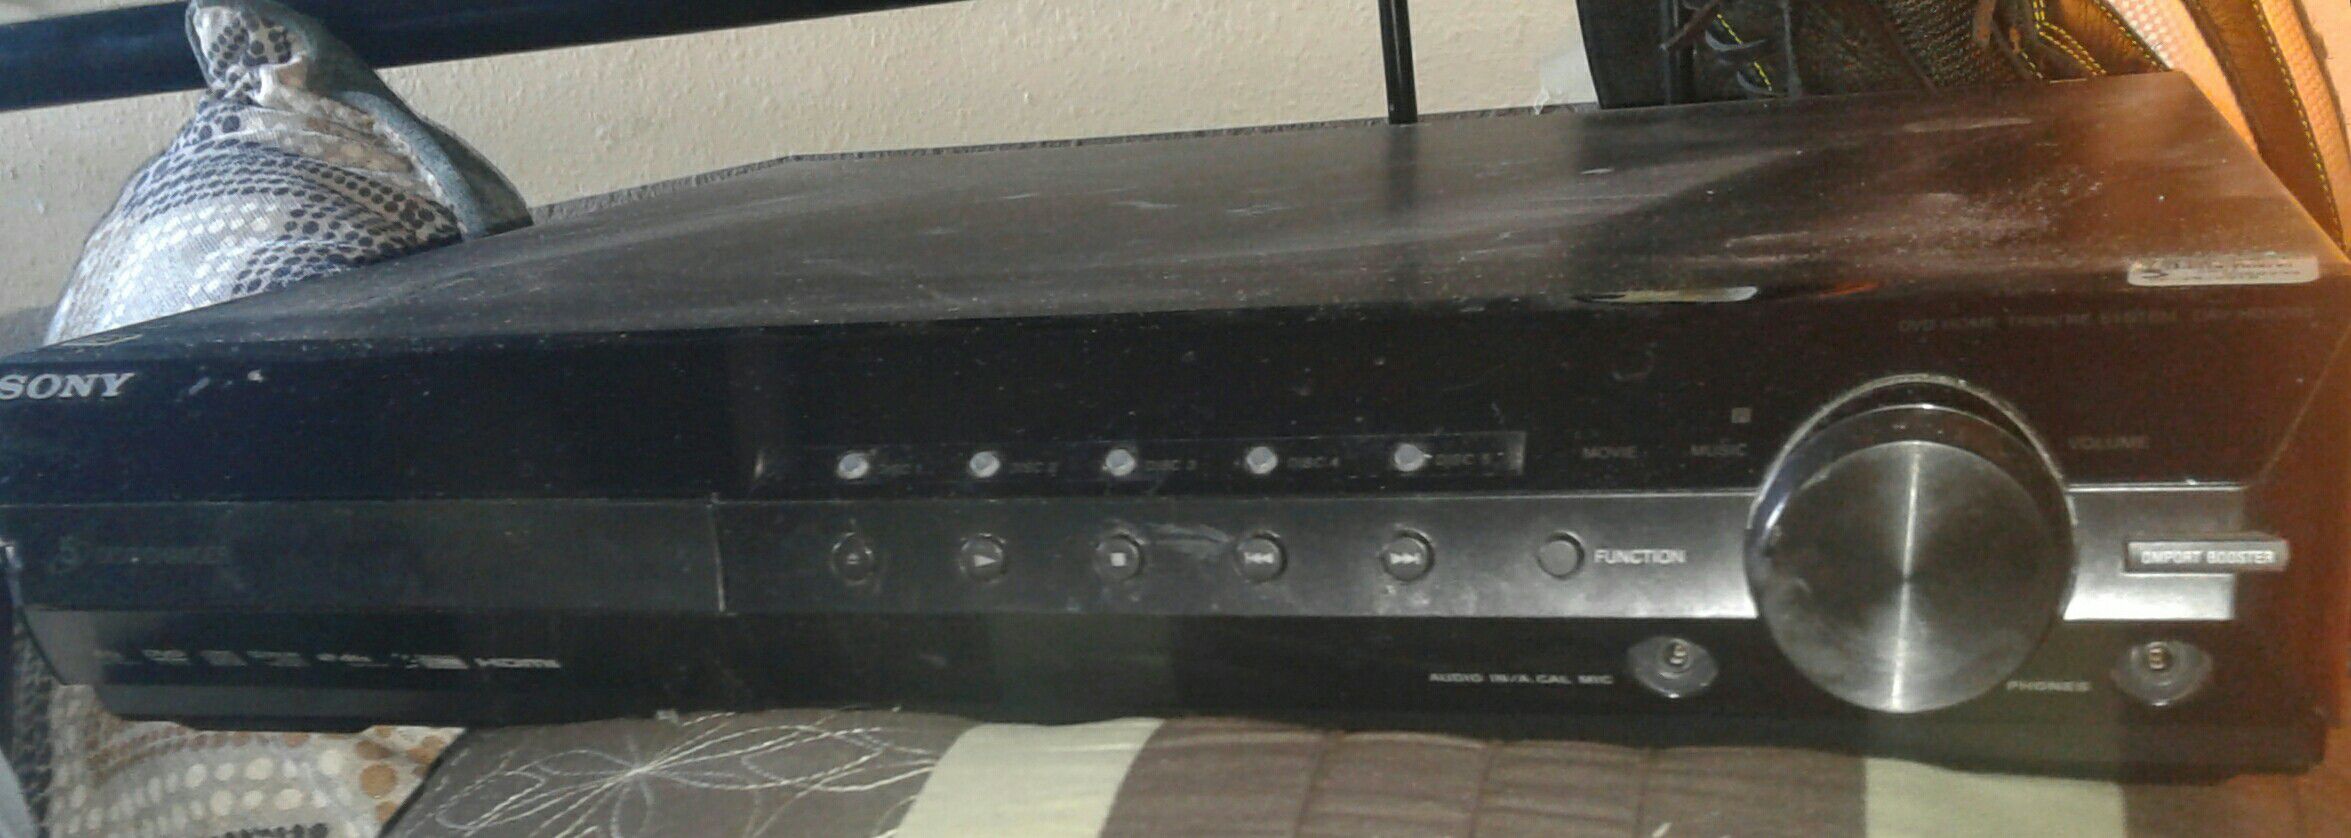 Sony 5 disc home theater component